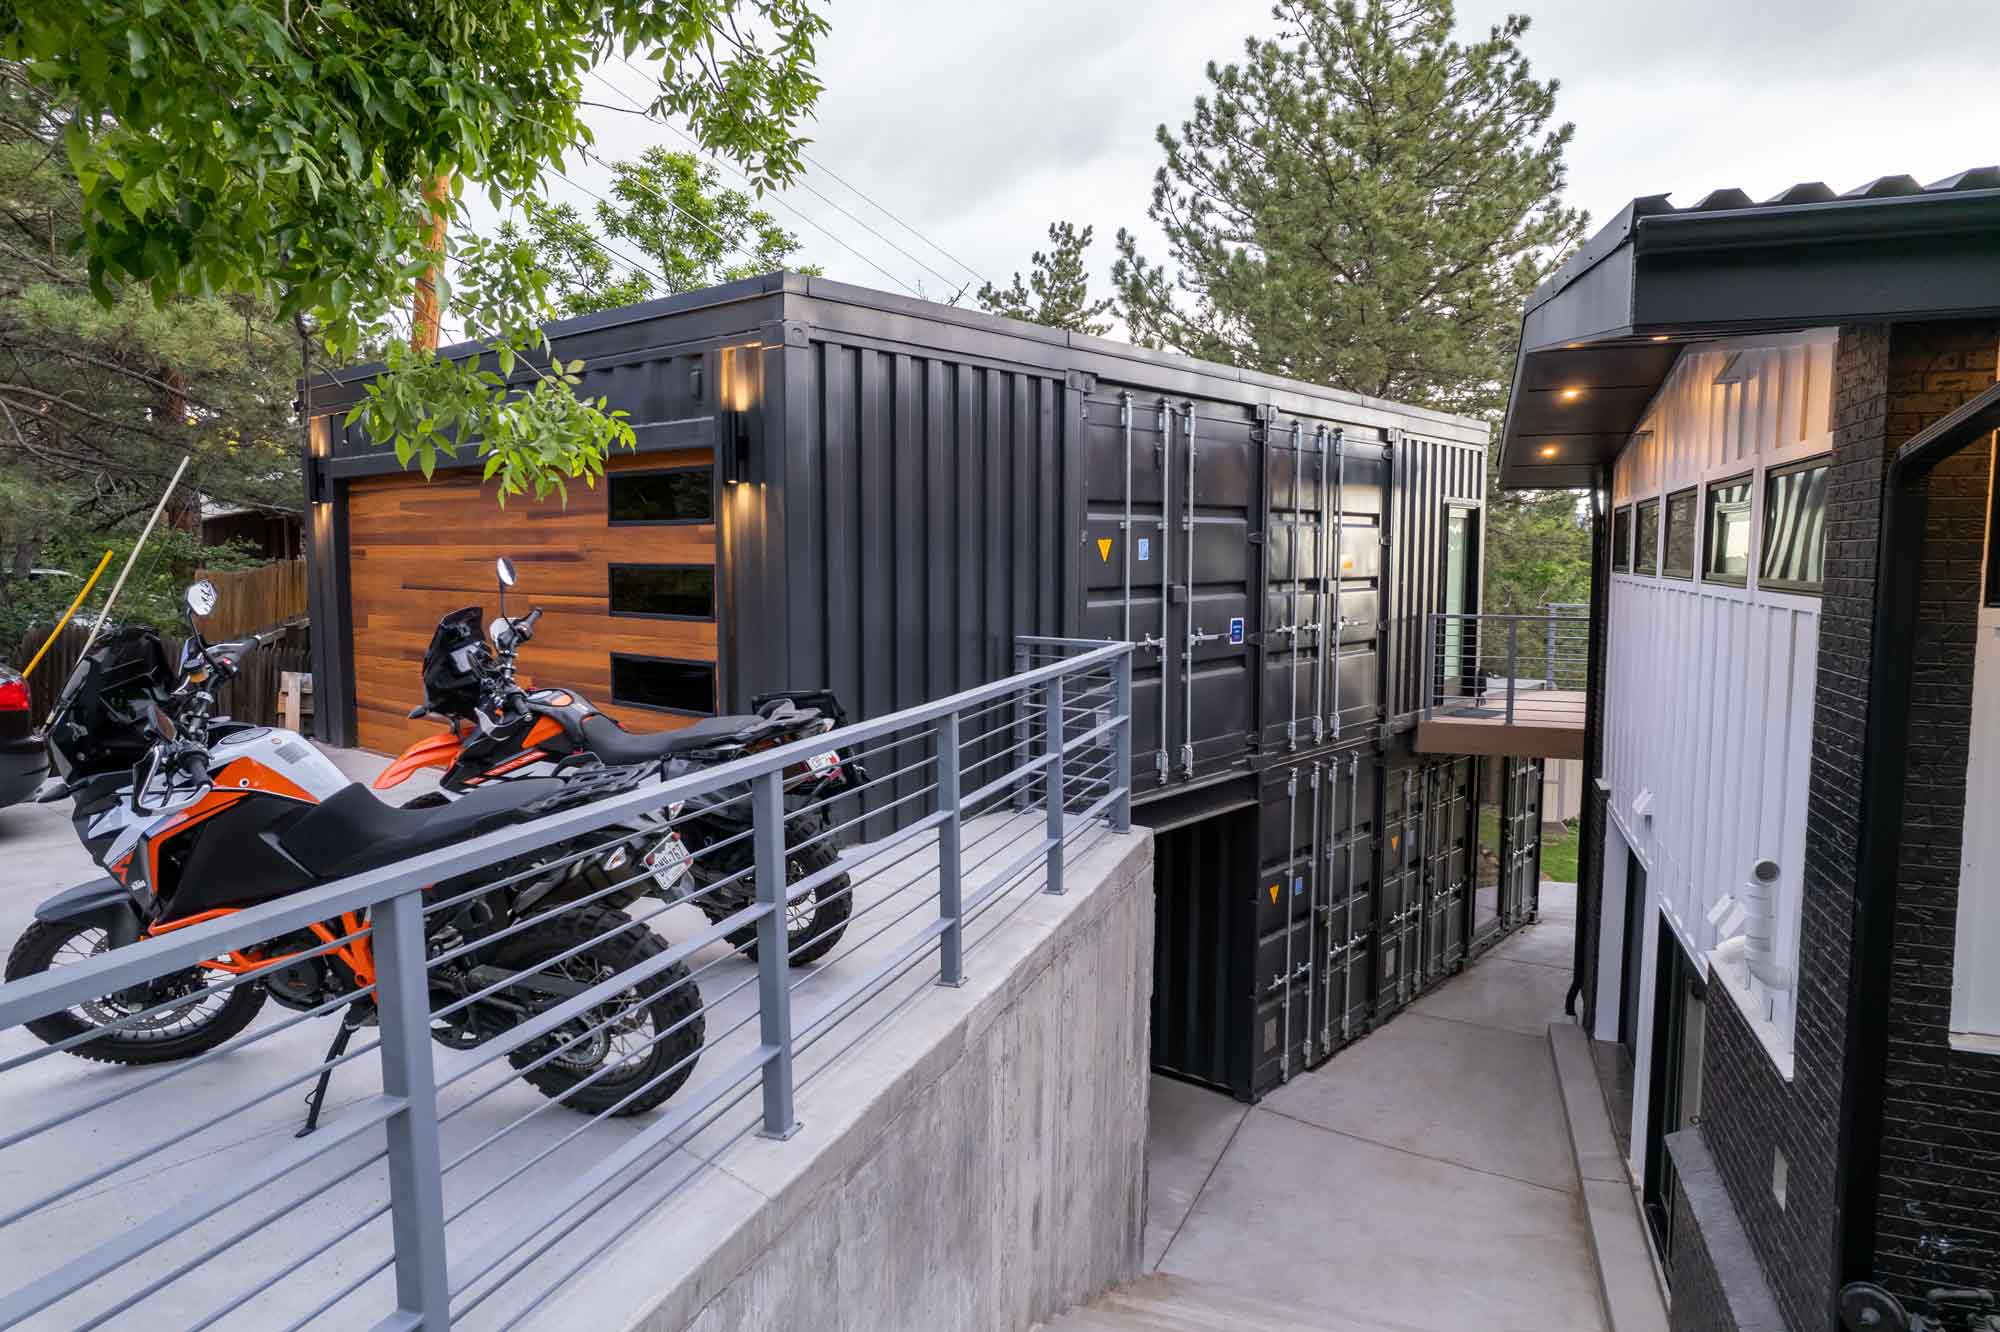 Garage containers: Bespoke garage container built by DC-Supply A/S